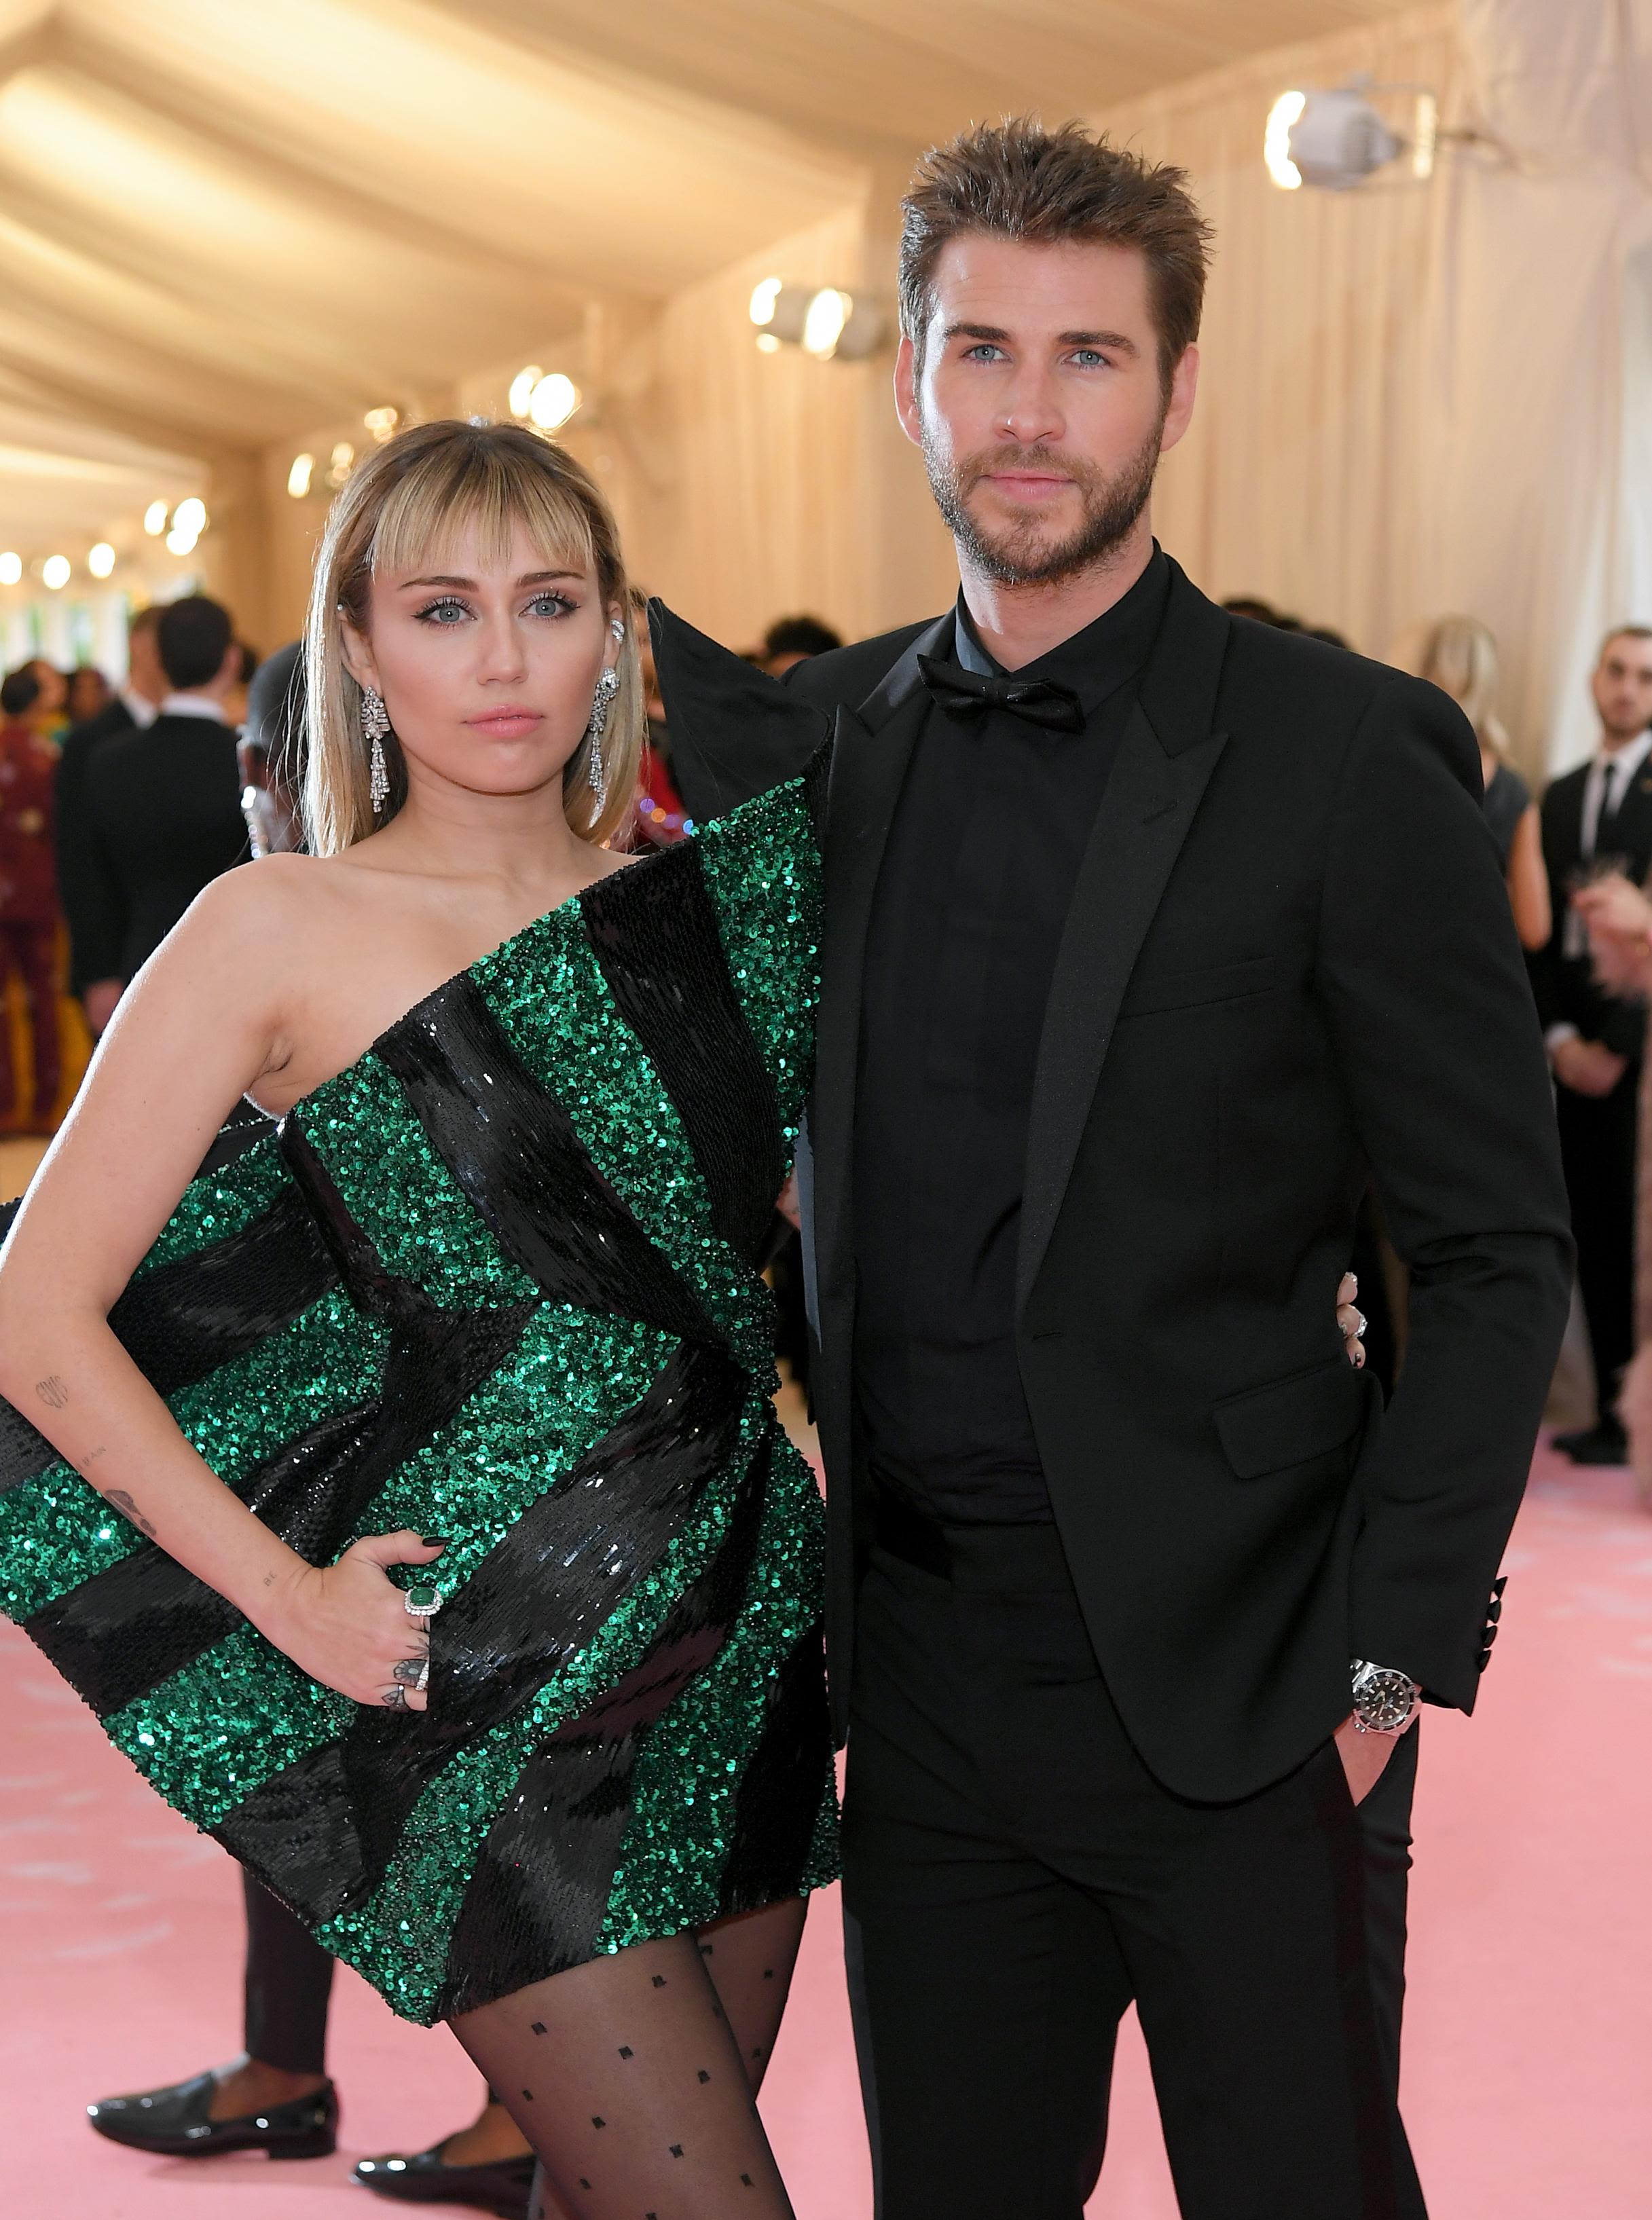 Miley Cyrus Opens Up About Sobriety, Saying She 'Fell Off' During Covid-19  Pandemic